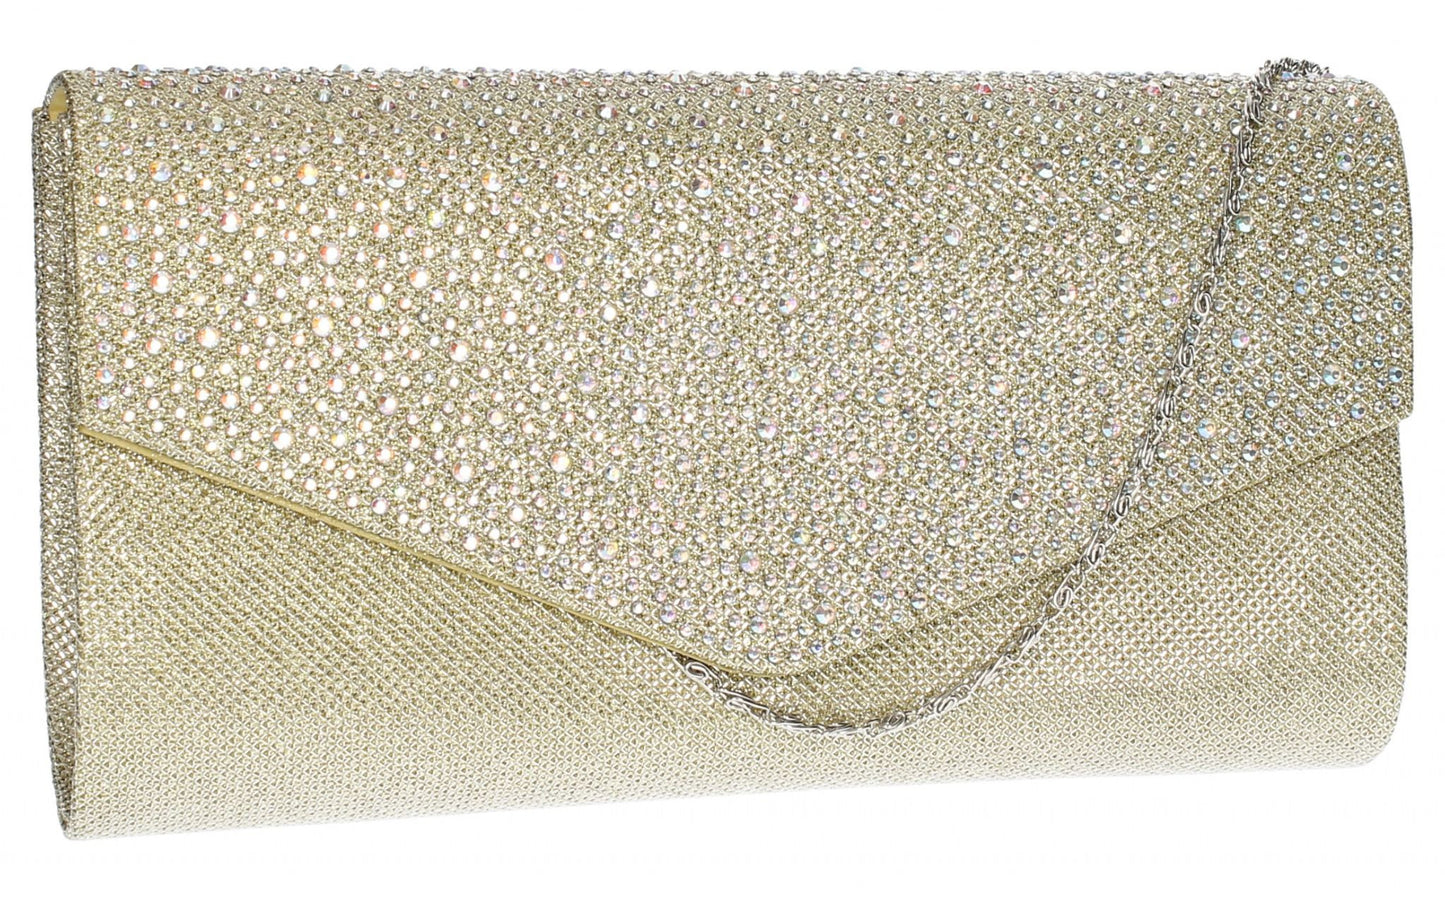 SWANKYSWANS Montary Clutch Bag Gold Cute Cheap Clutch Bag For Weddings School and Work